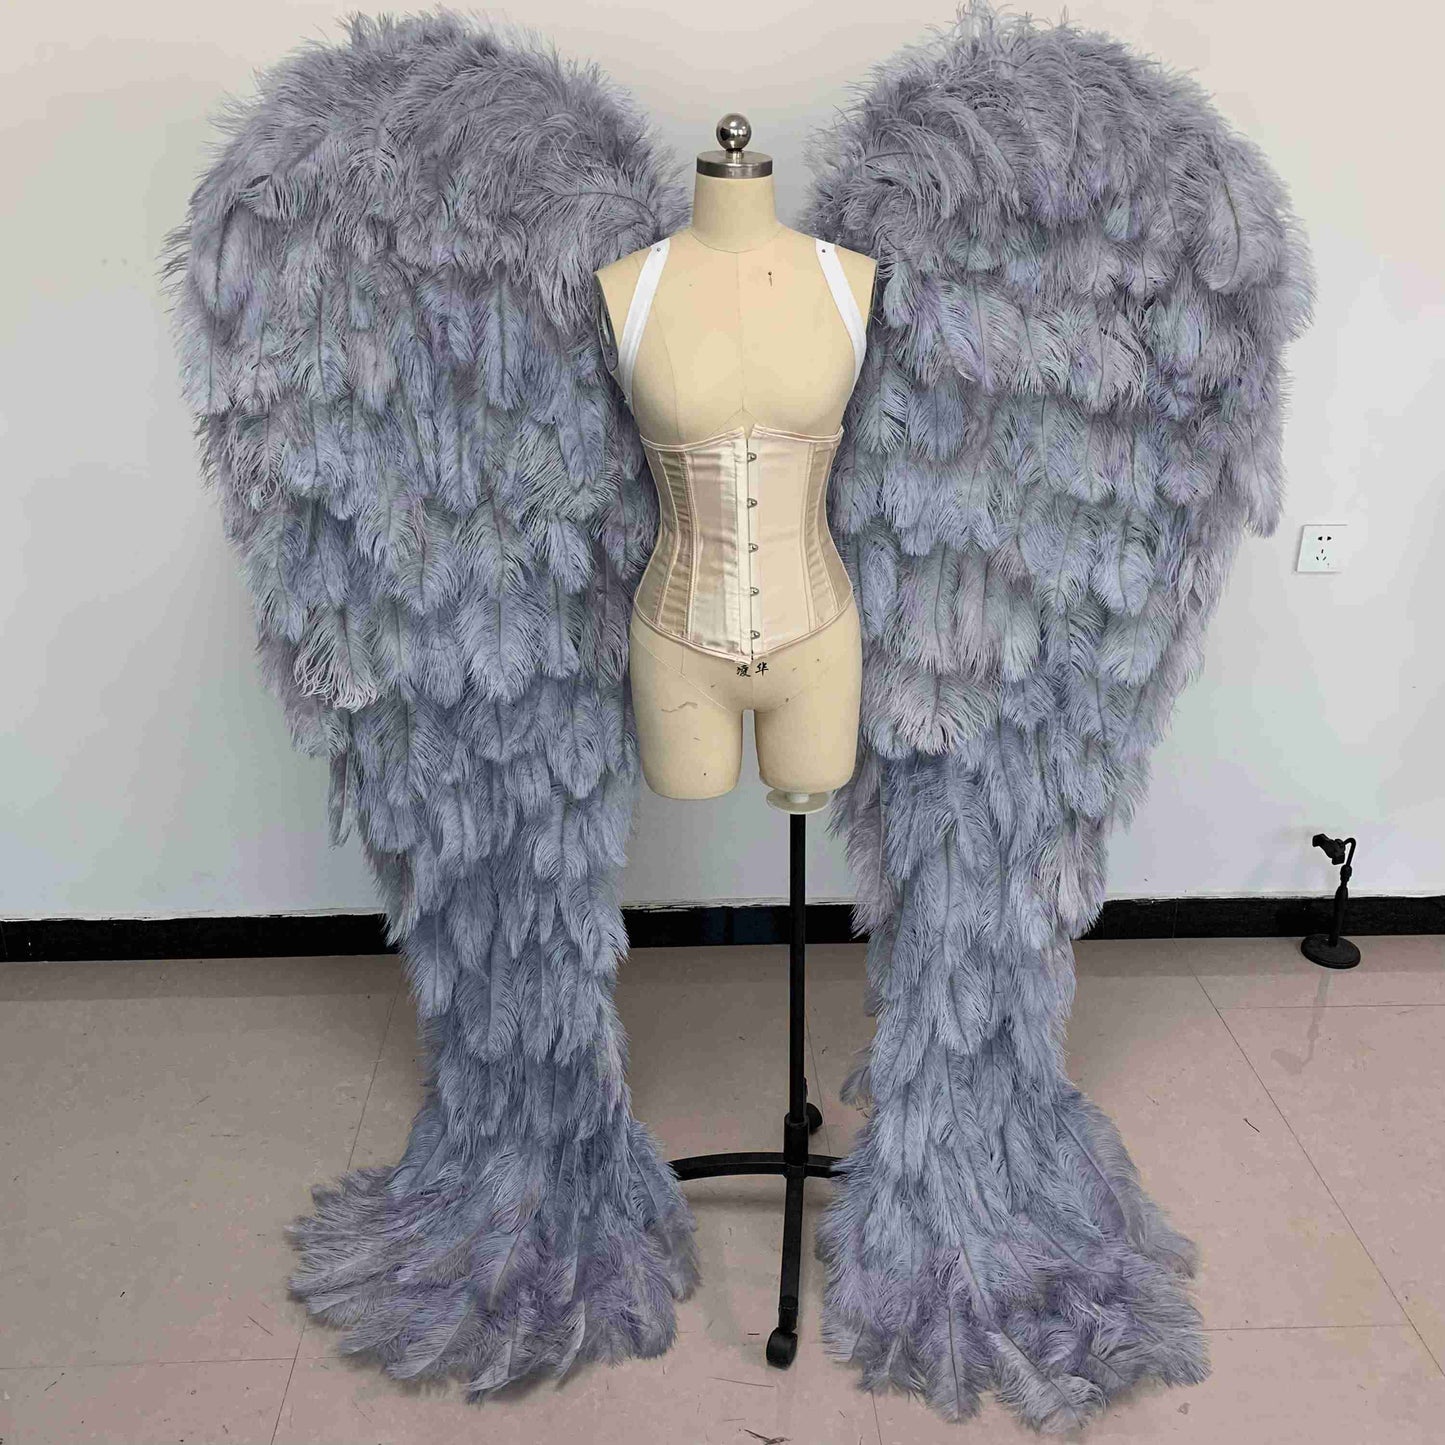 Our luxury gray angel wings from the front. Made from ostrich feathers. Wings for angel costume. Suitable for photoshoots especially for boudoirs.